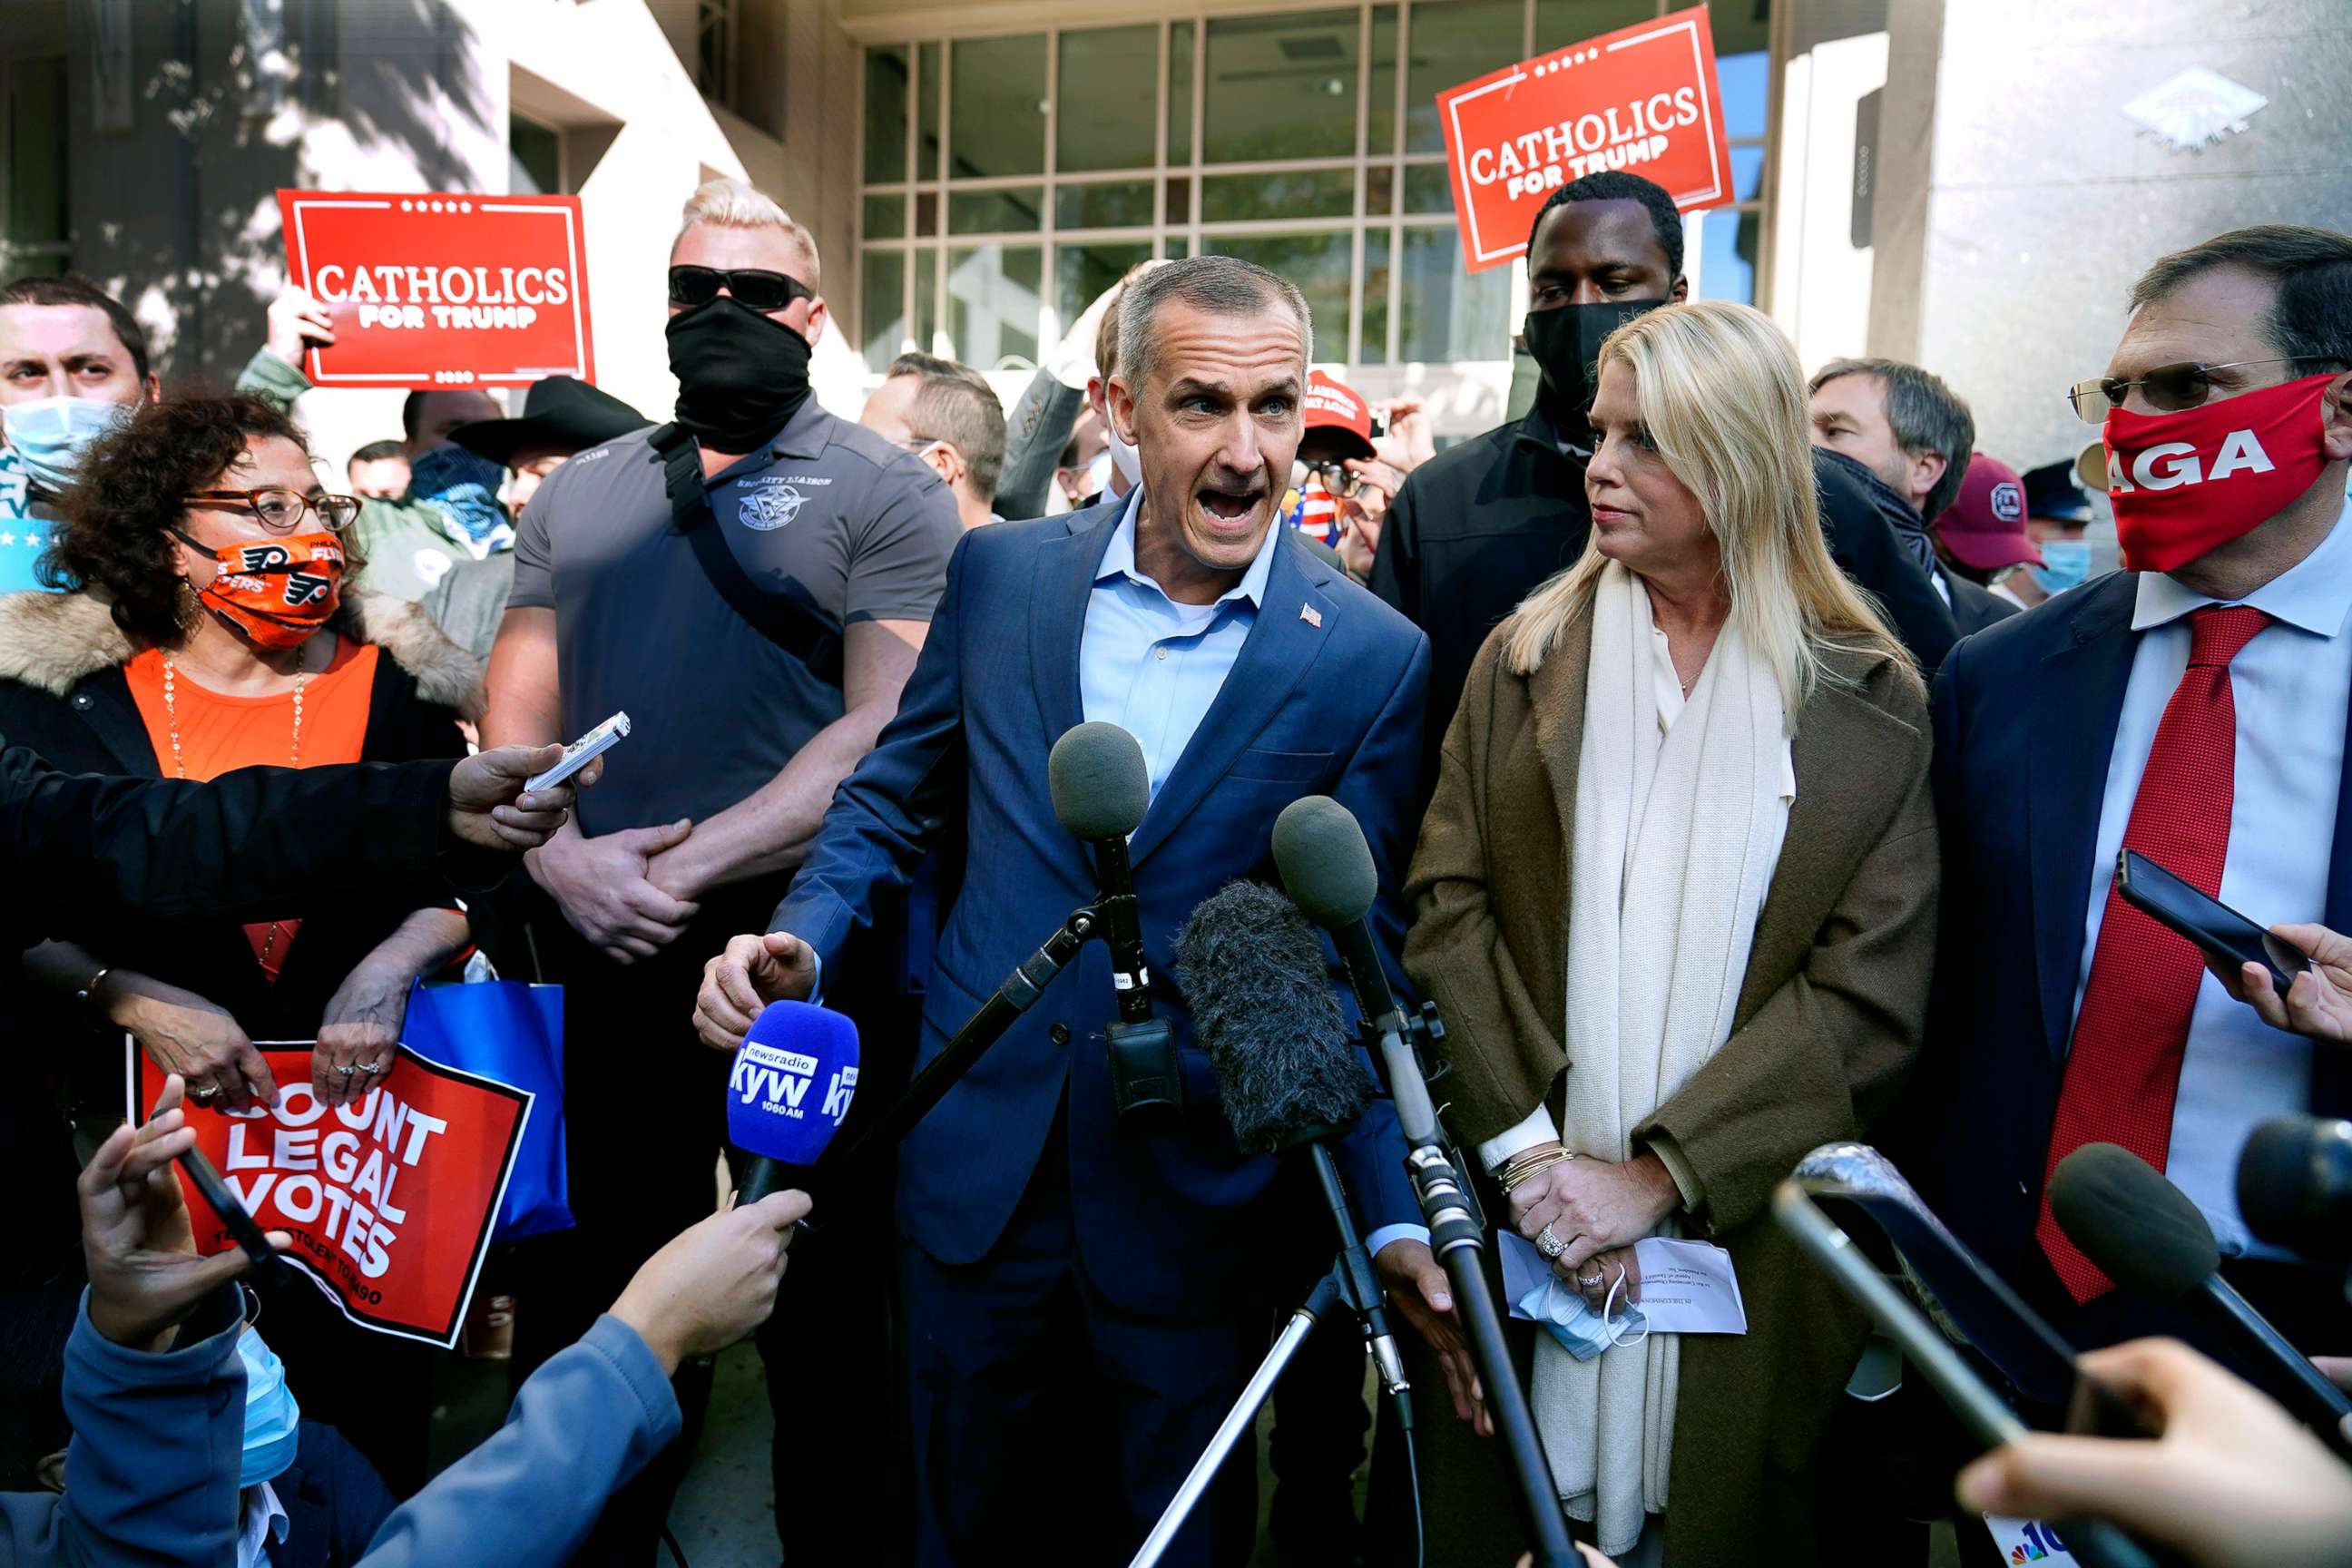 PHOTO: President Donald Trump's campaign advisor Corey Lewandowski, center, speaks about a court order obtained to grant more access to vote counting operations at the Pennsylvania Convention Center, Nov. 5, 2020, in Philadelphia.